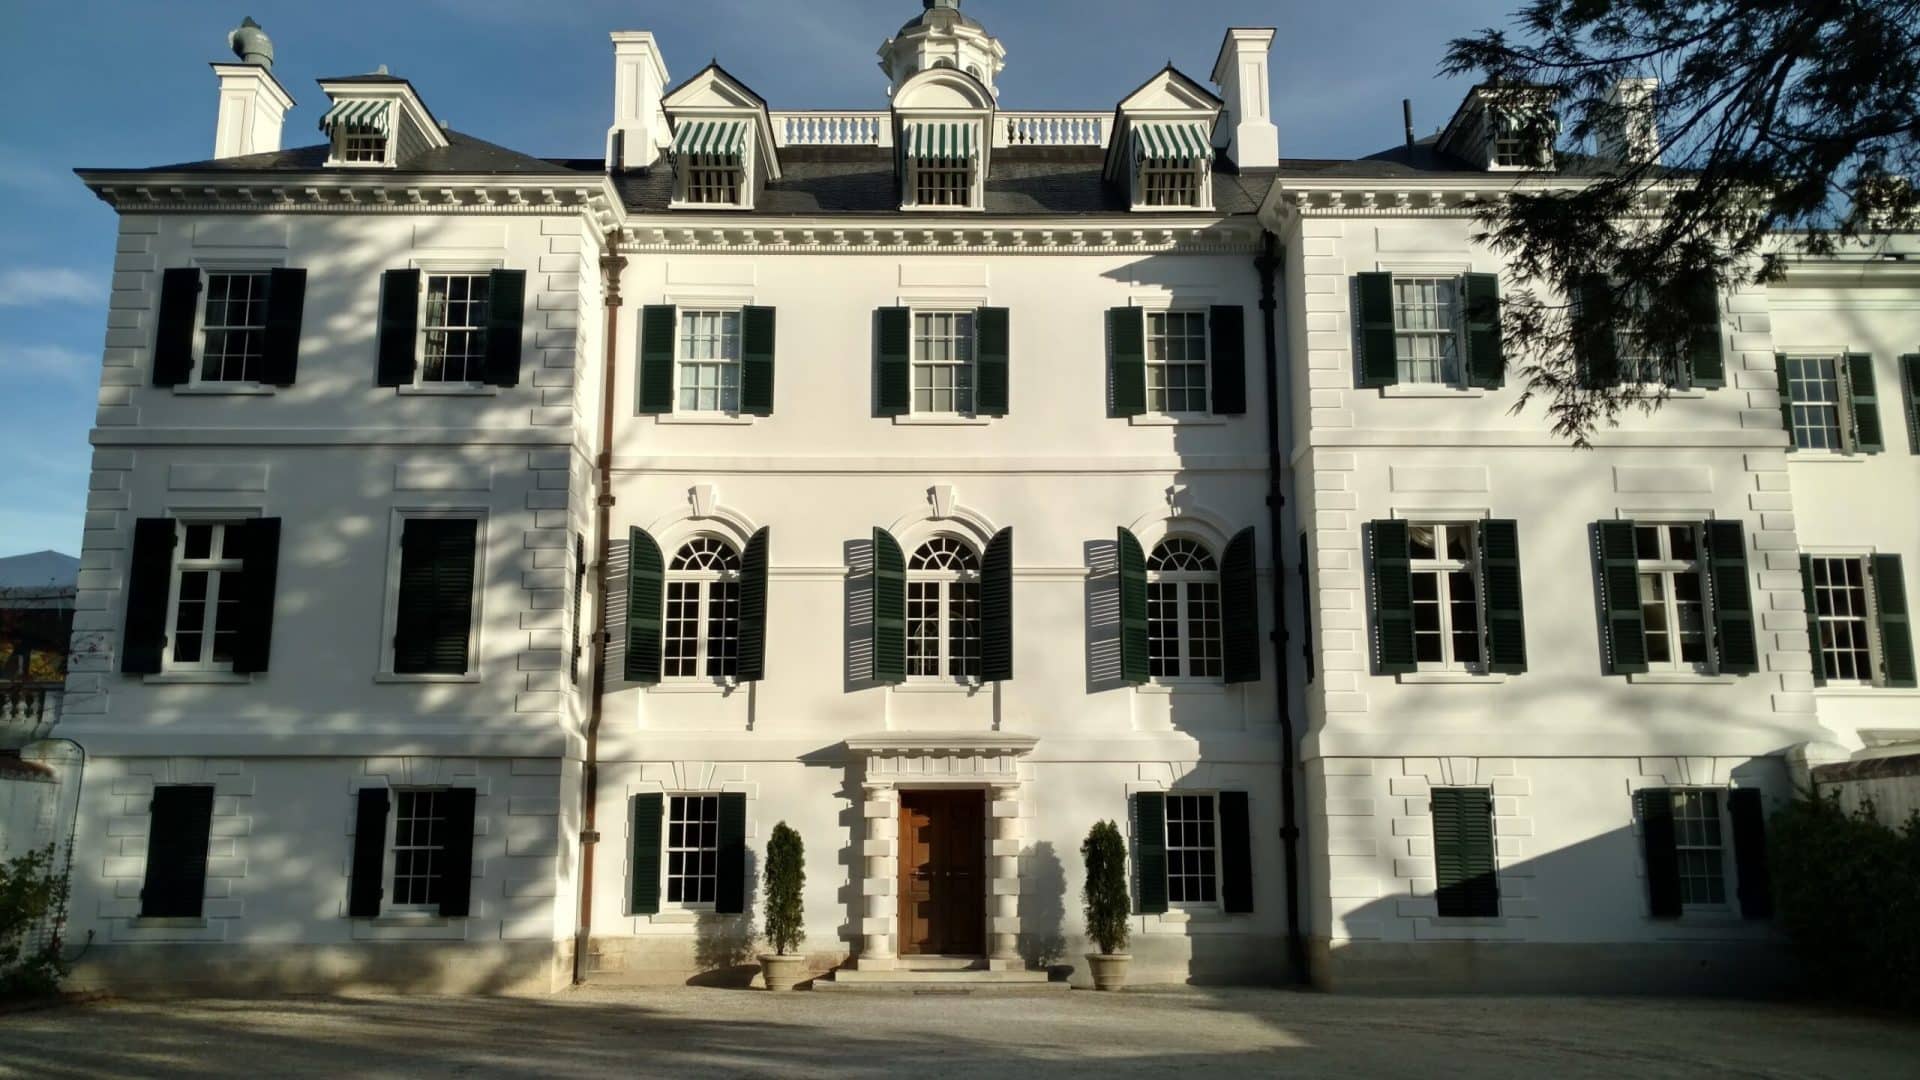 Edith Wharton Estate The Mount musuem, large, white two-story home